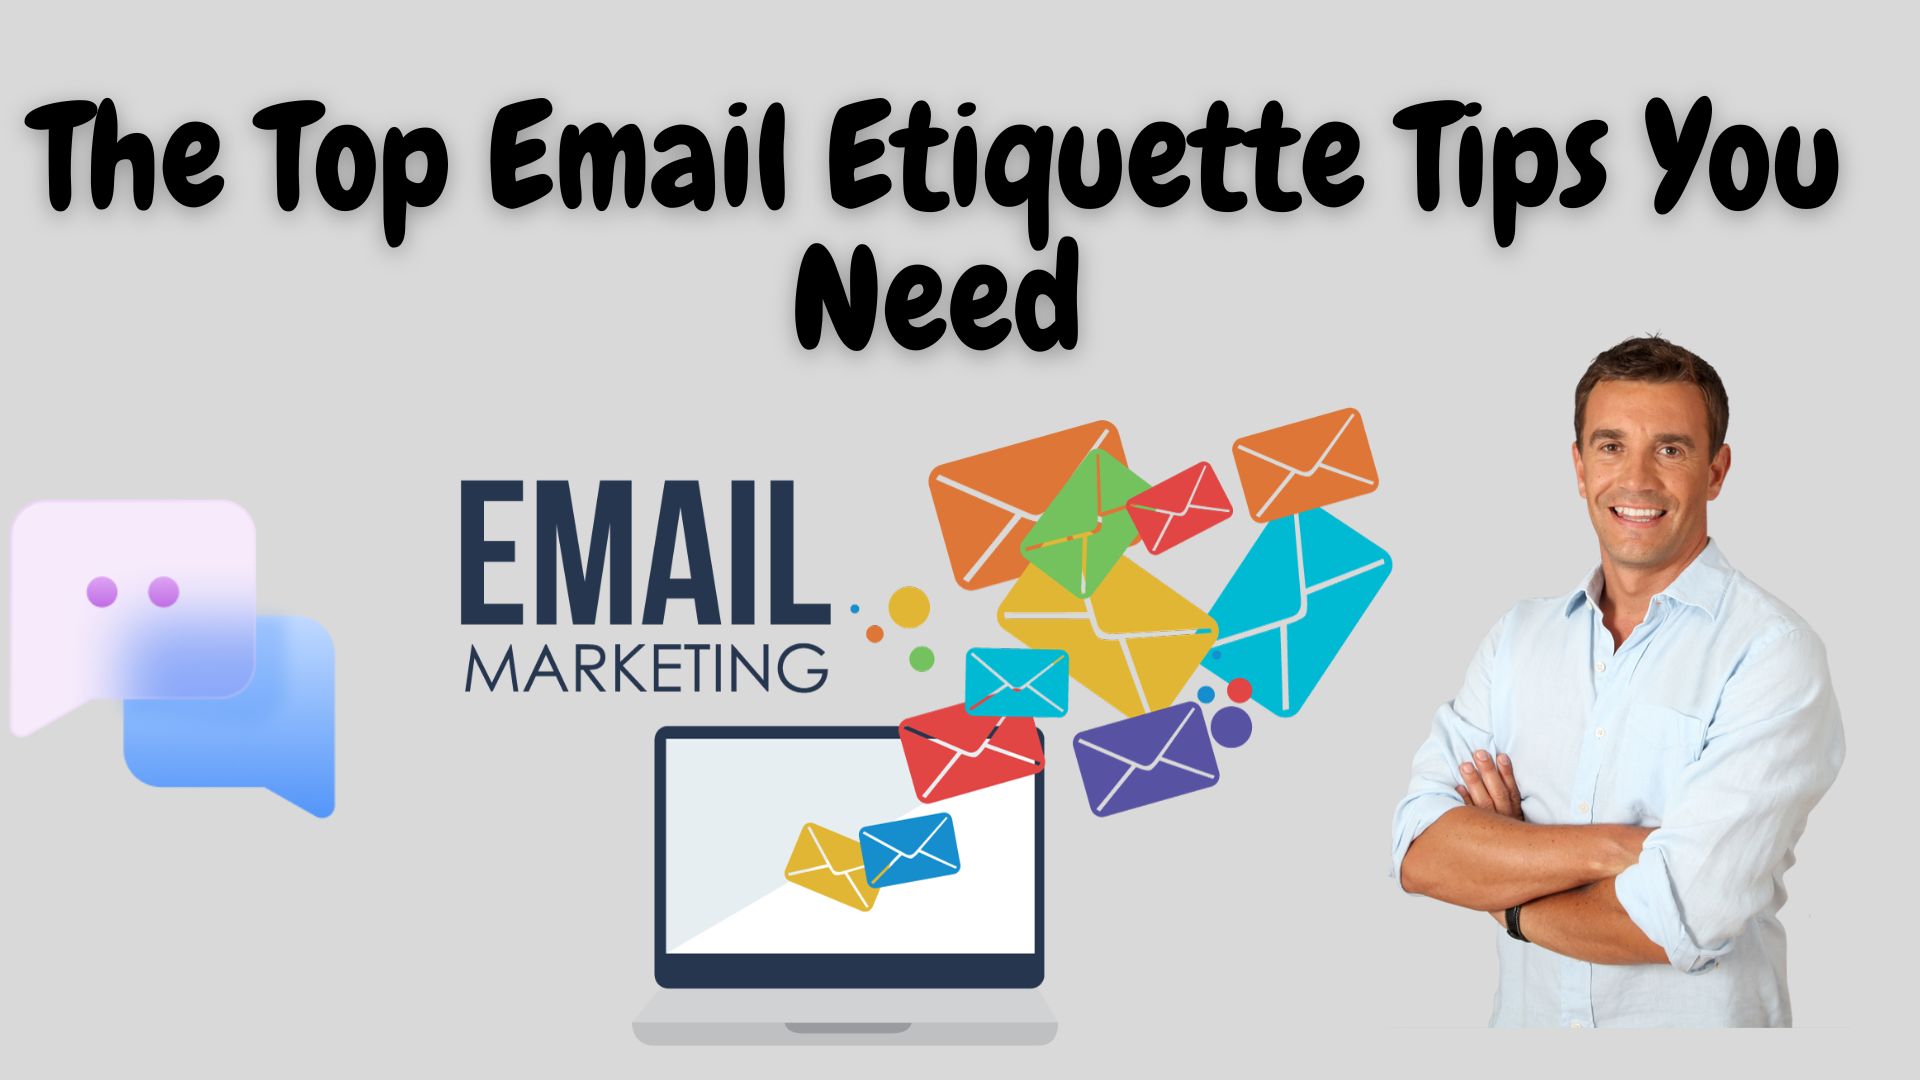 The top email etiquette tips you need